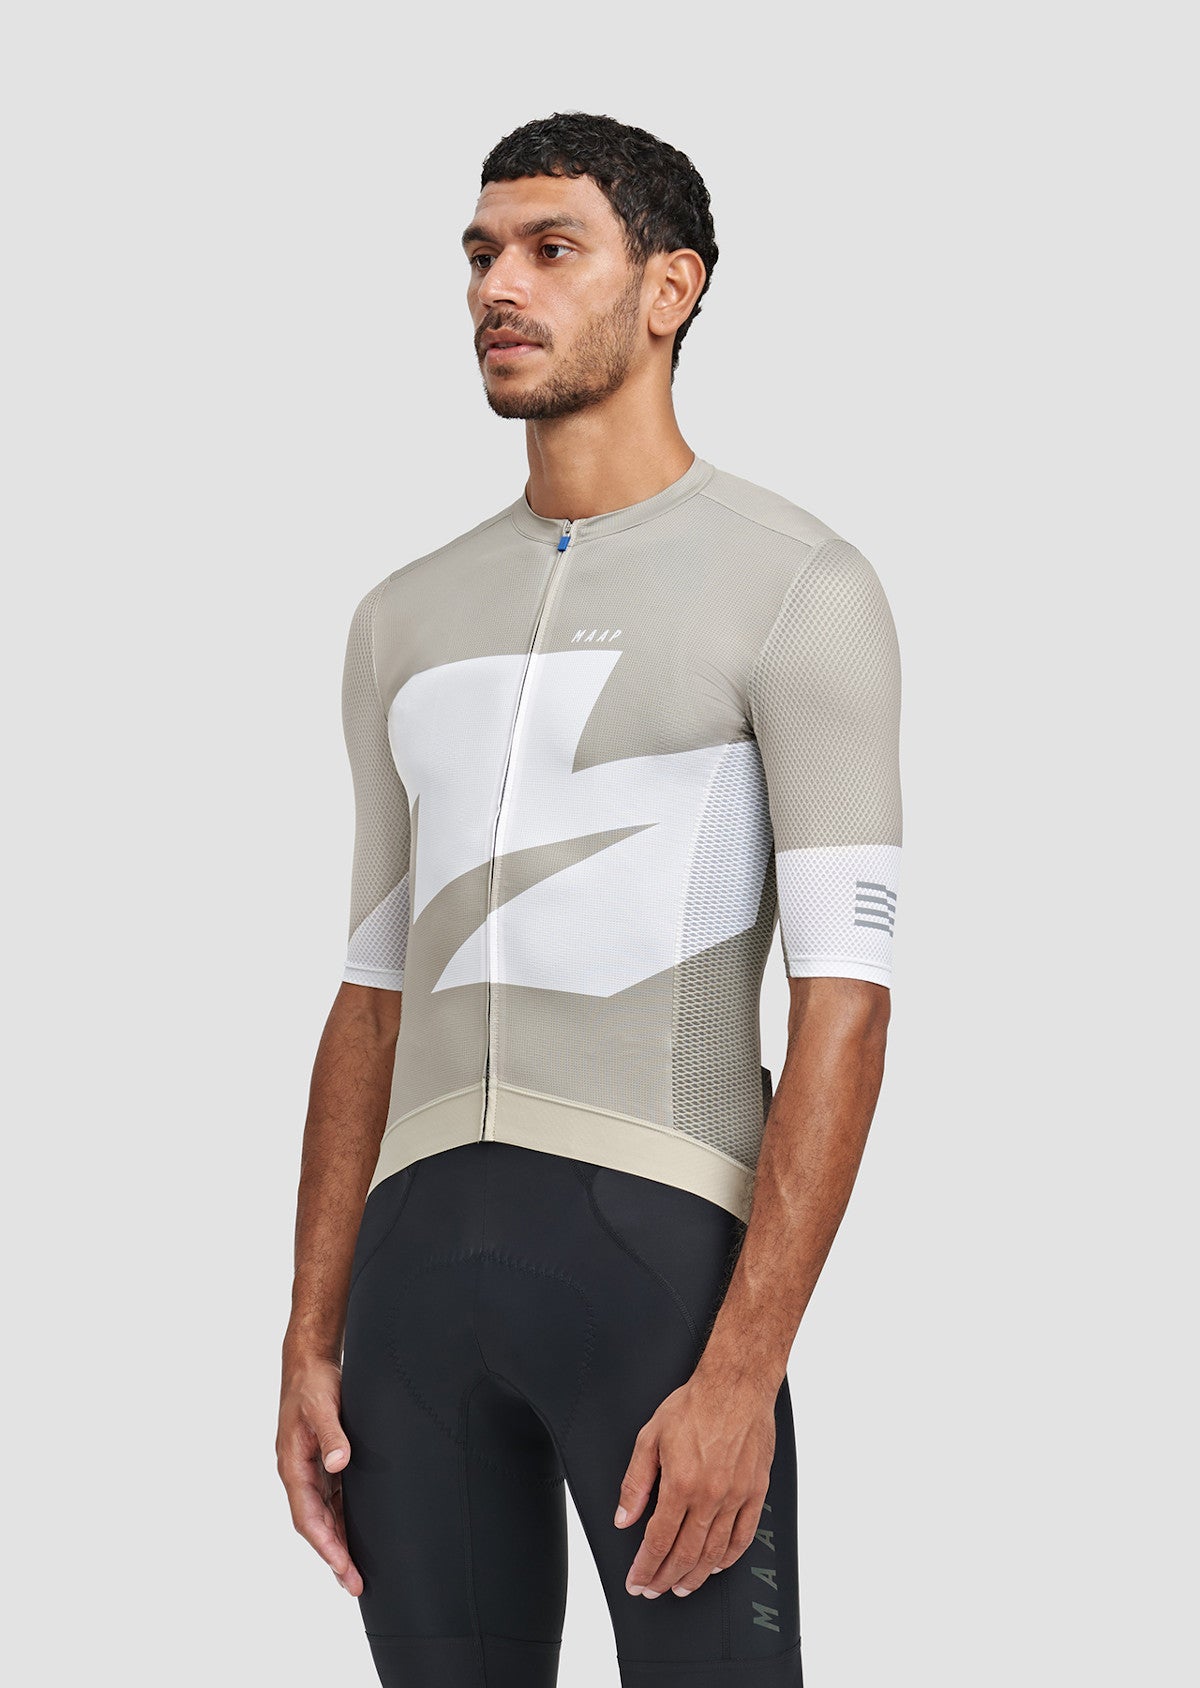 MAAP Evade collection teases cycling kit for warm weather - Velo